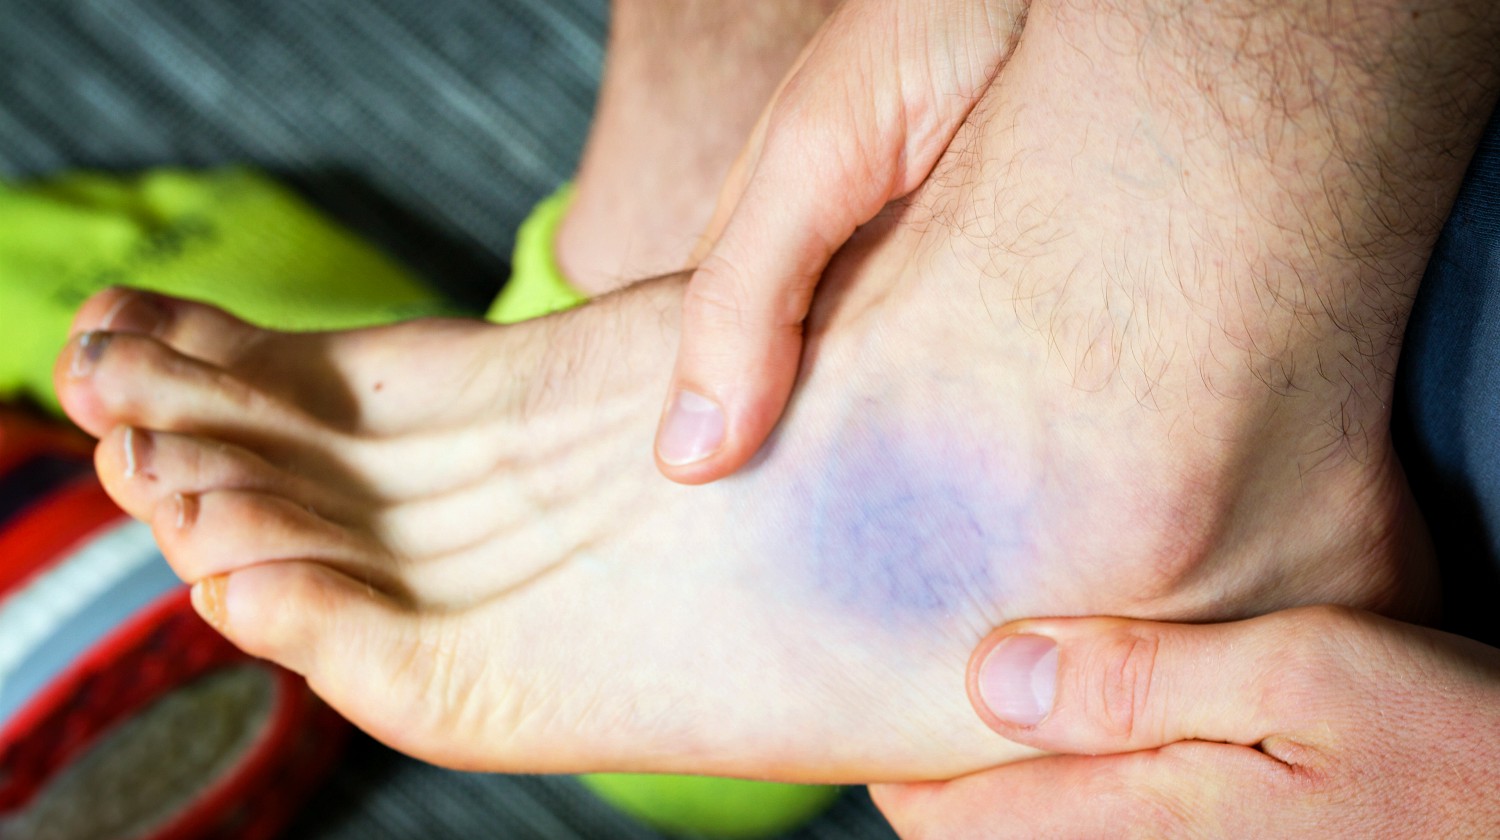 Featured | Bruise near ankle, common runners contusion | Ankle Sprain Treatment For First, Second, And Third Degree Sprains